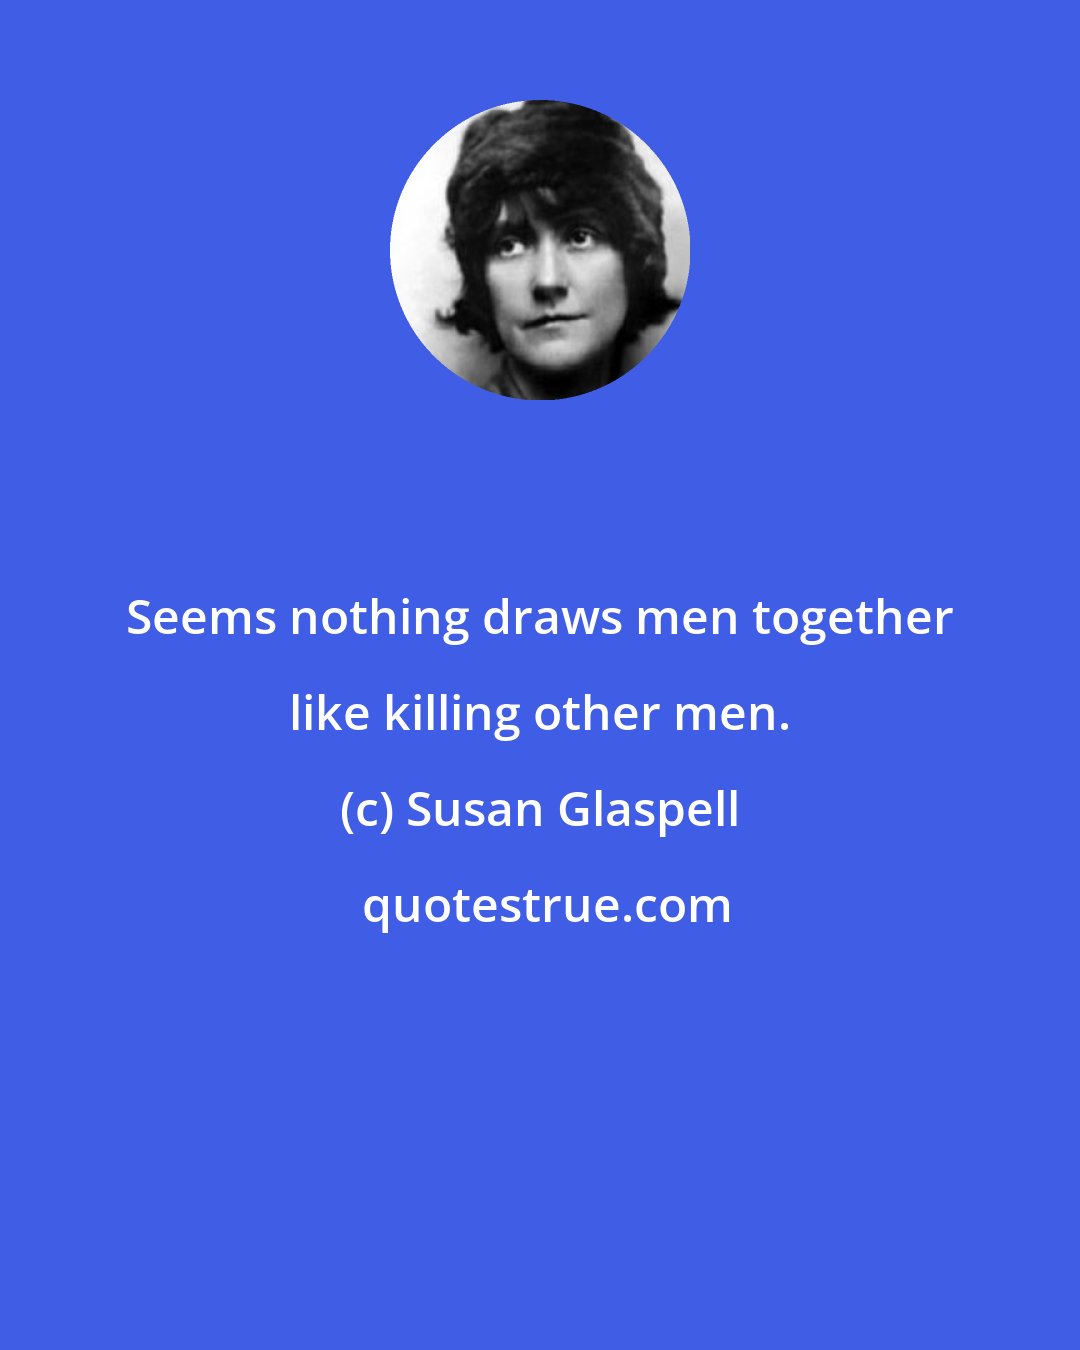 Susan Glaspell: Seems nothing draws men together like killing other men.